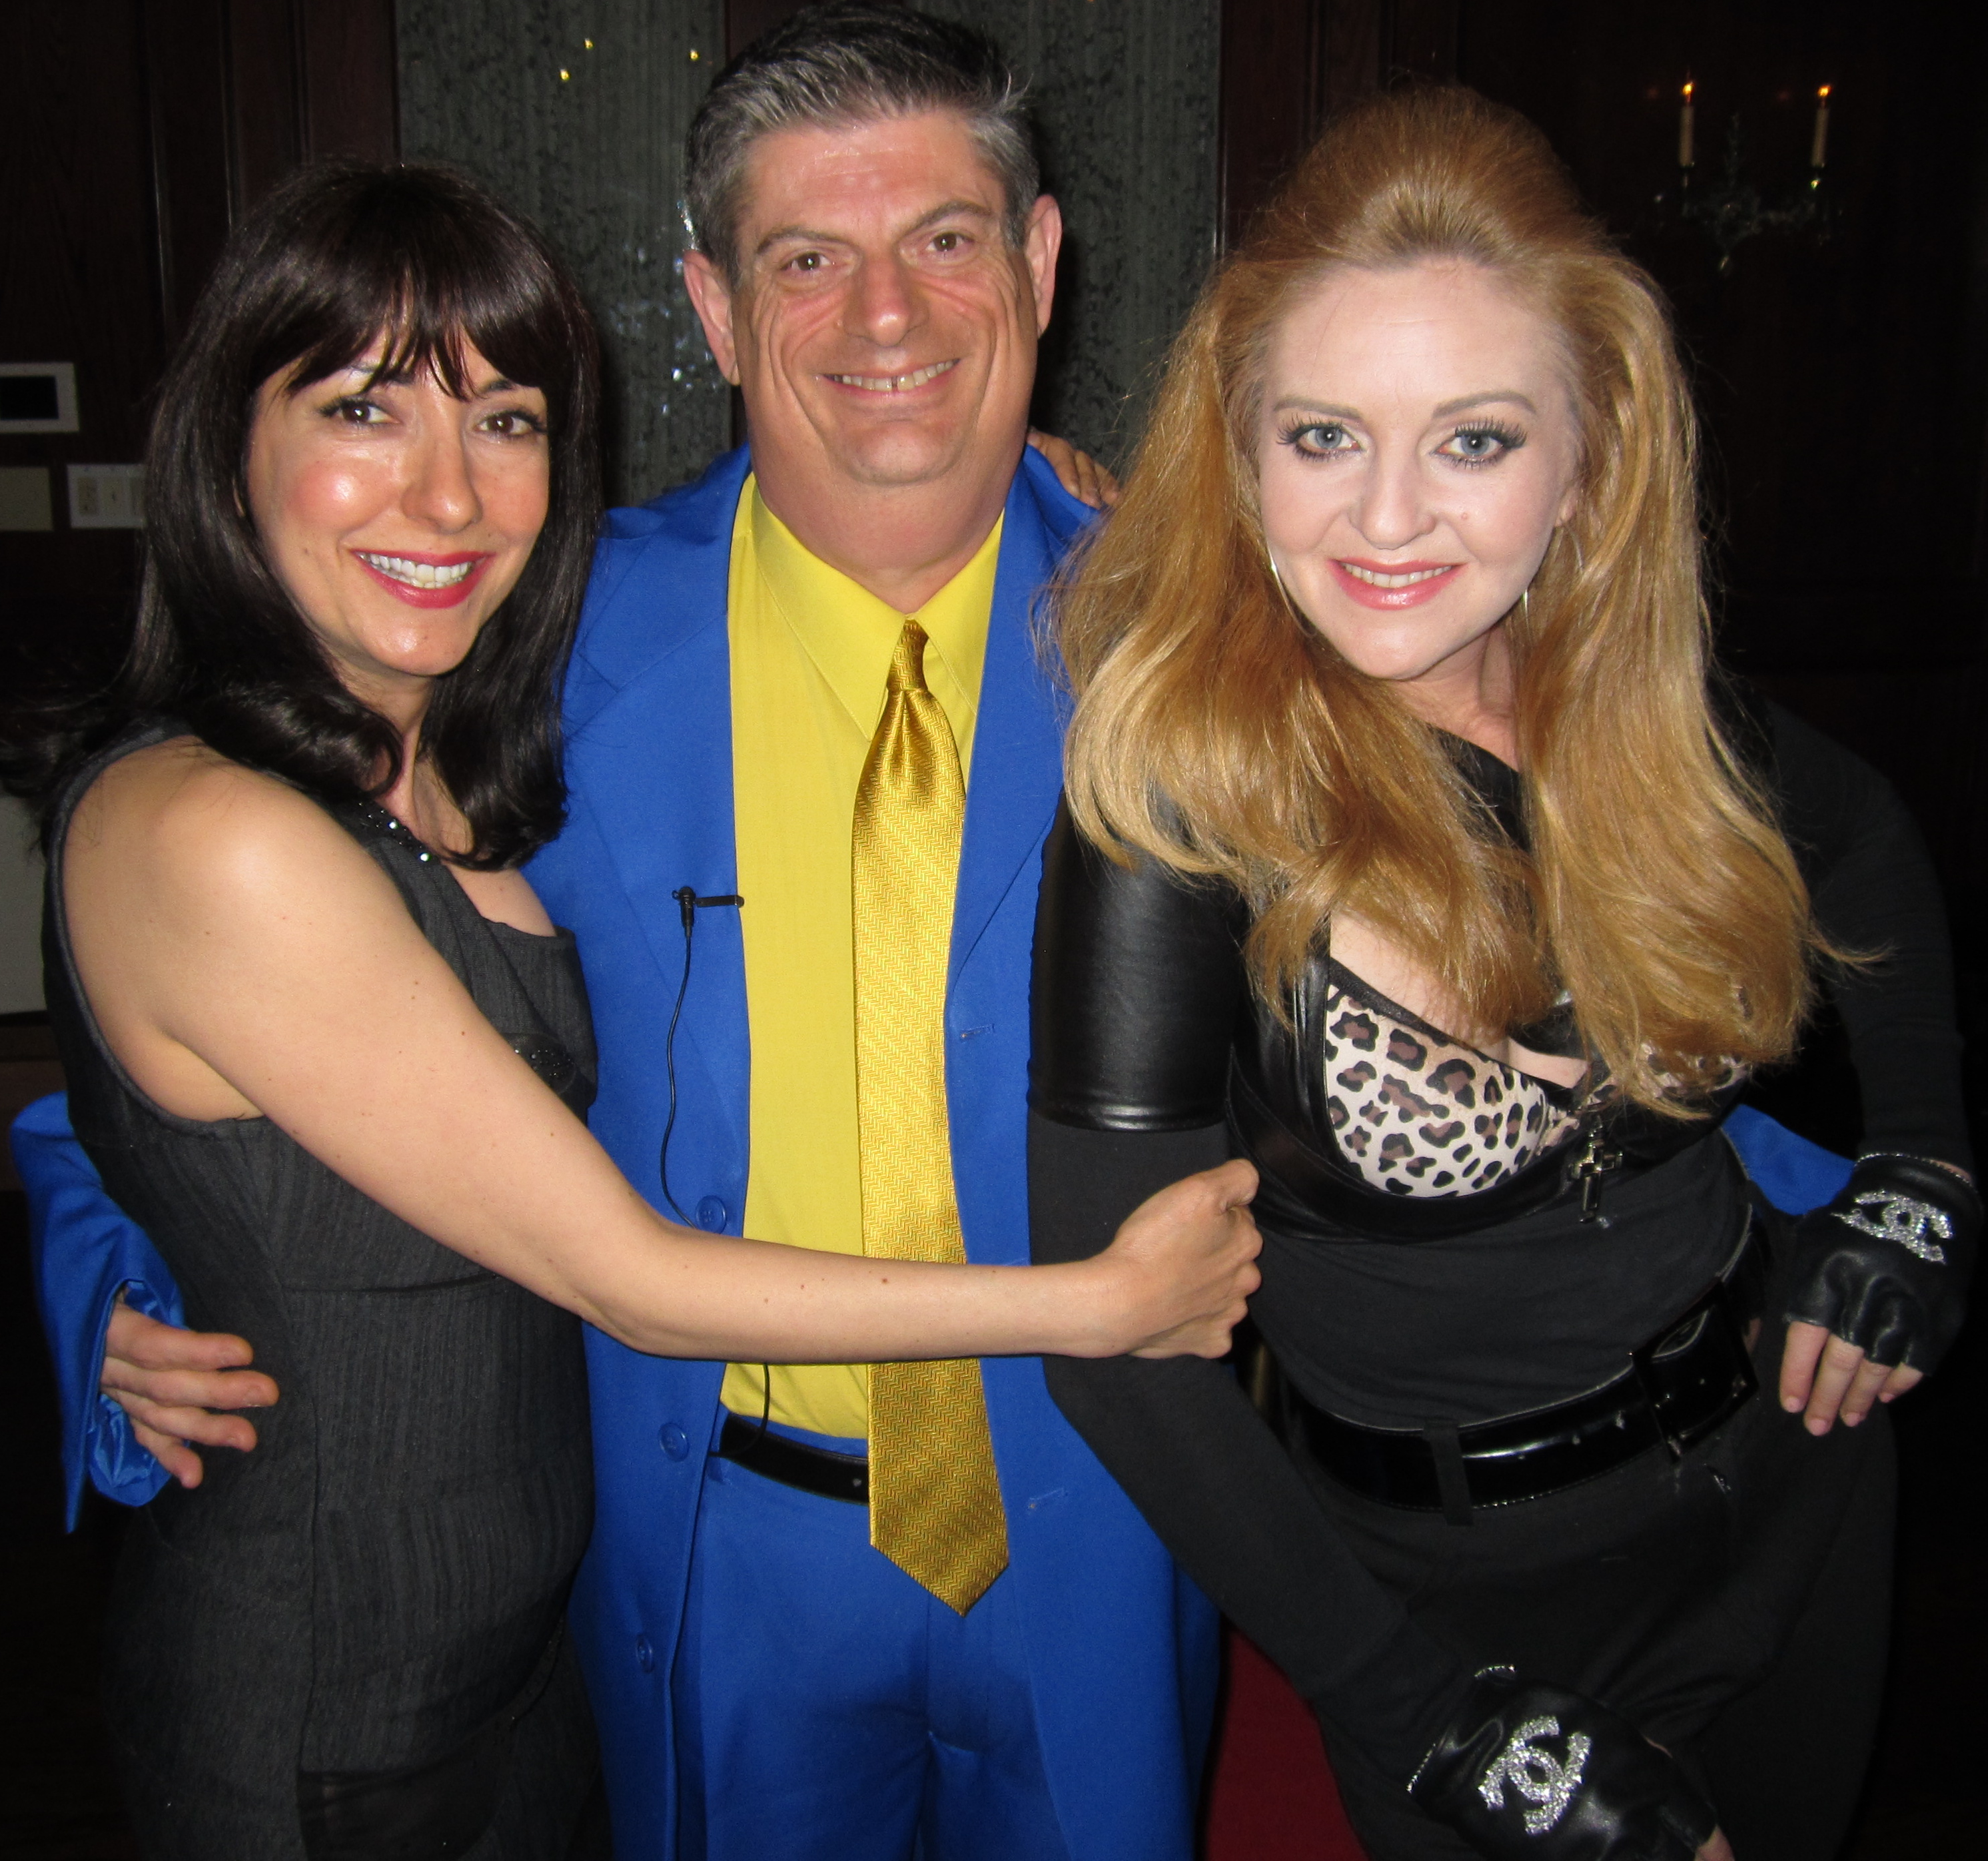 Luciana Lagana (cast as Luisa Valente, Ph.D.), Michael Moutsatsos (director/producer of the feature Material World) and Holly Beavon (cast as a Madonna impersonator) at the premiere of the movie in Hollywood on 4/14/2013